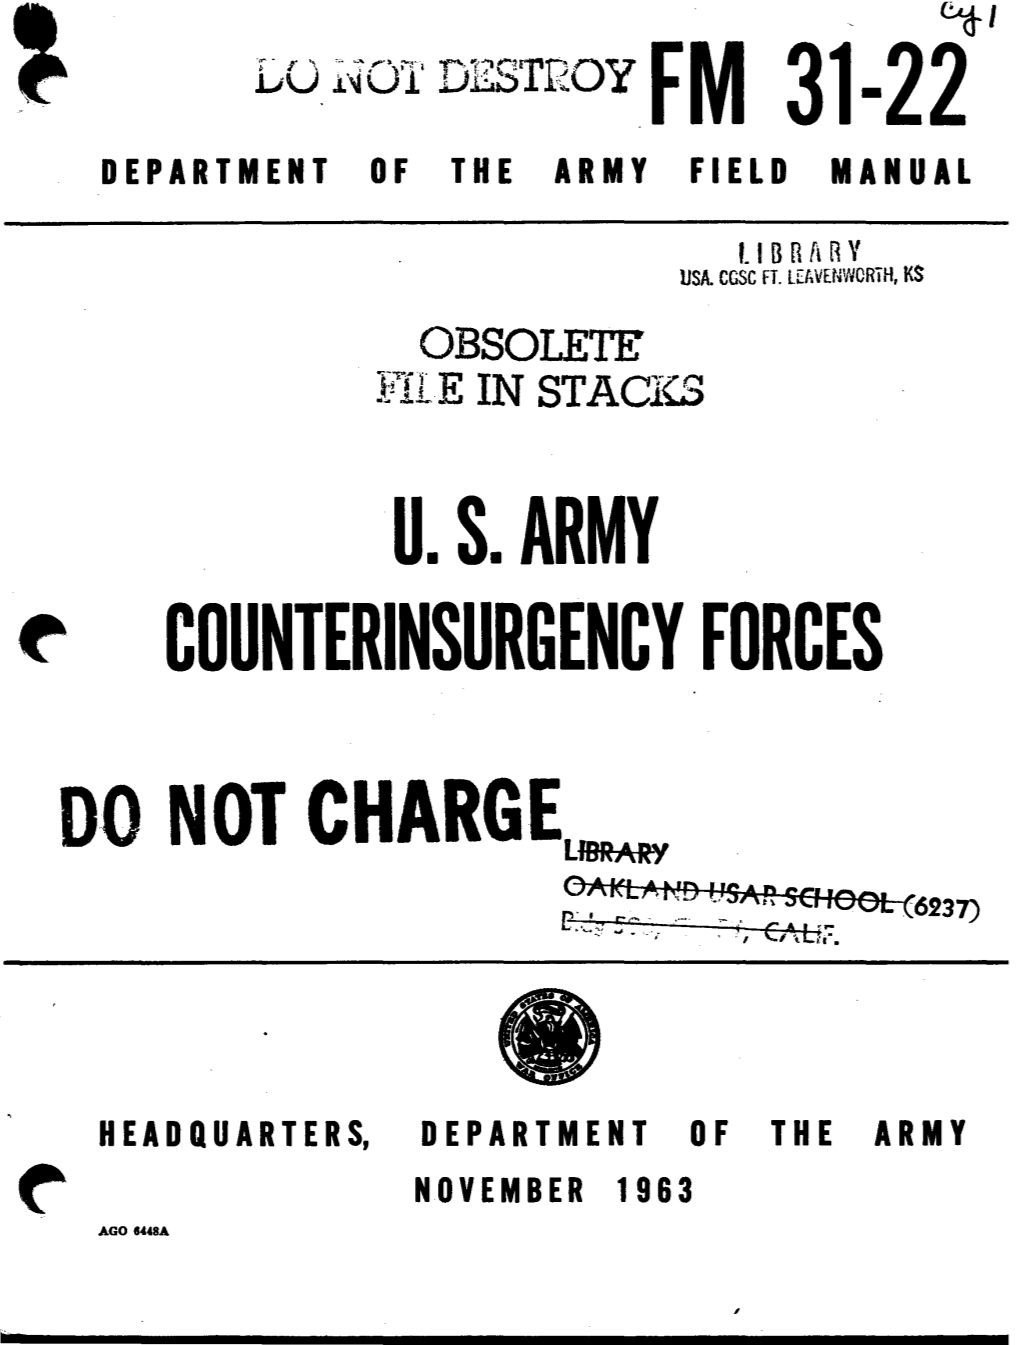 FM 31-22: US Army Countterinsurgency Forces